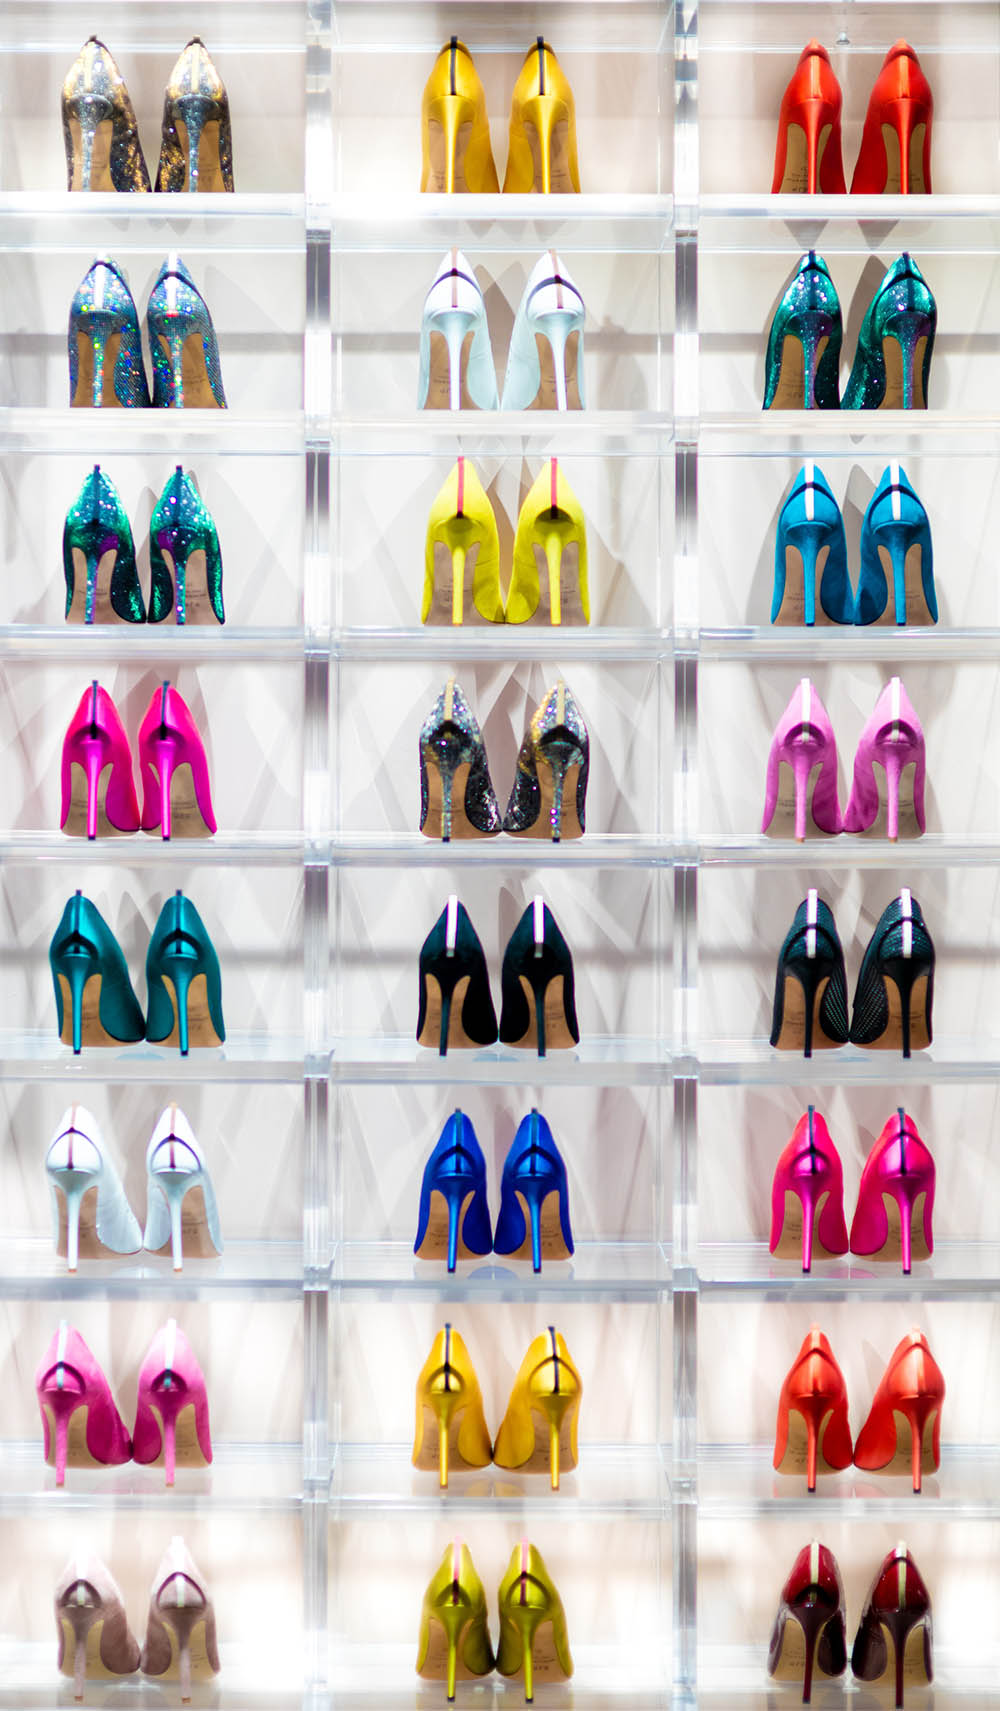 issey miyake Archives - High Heel Confidential